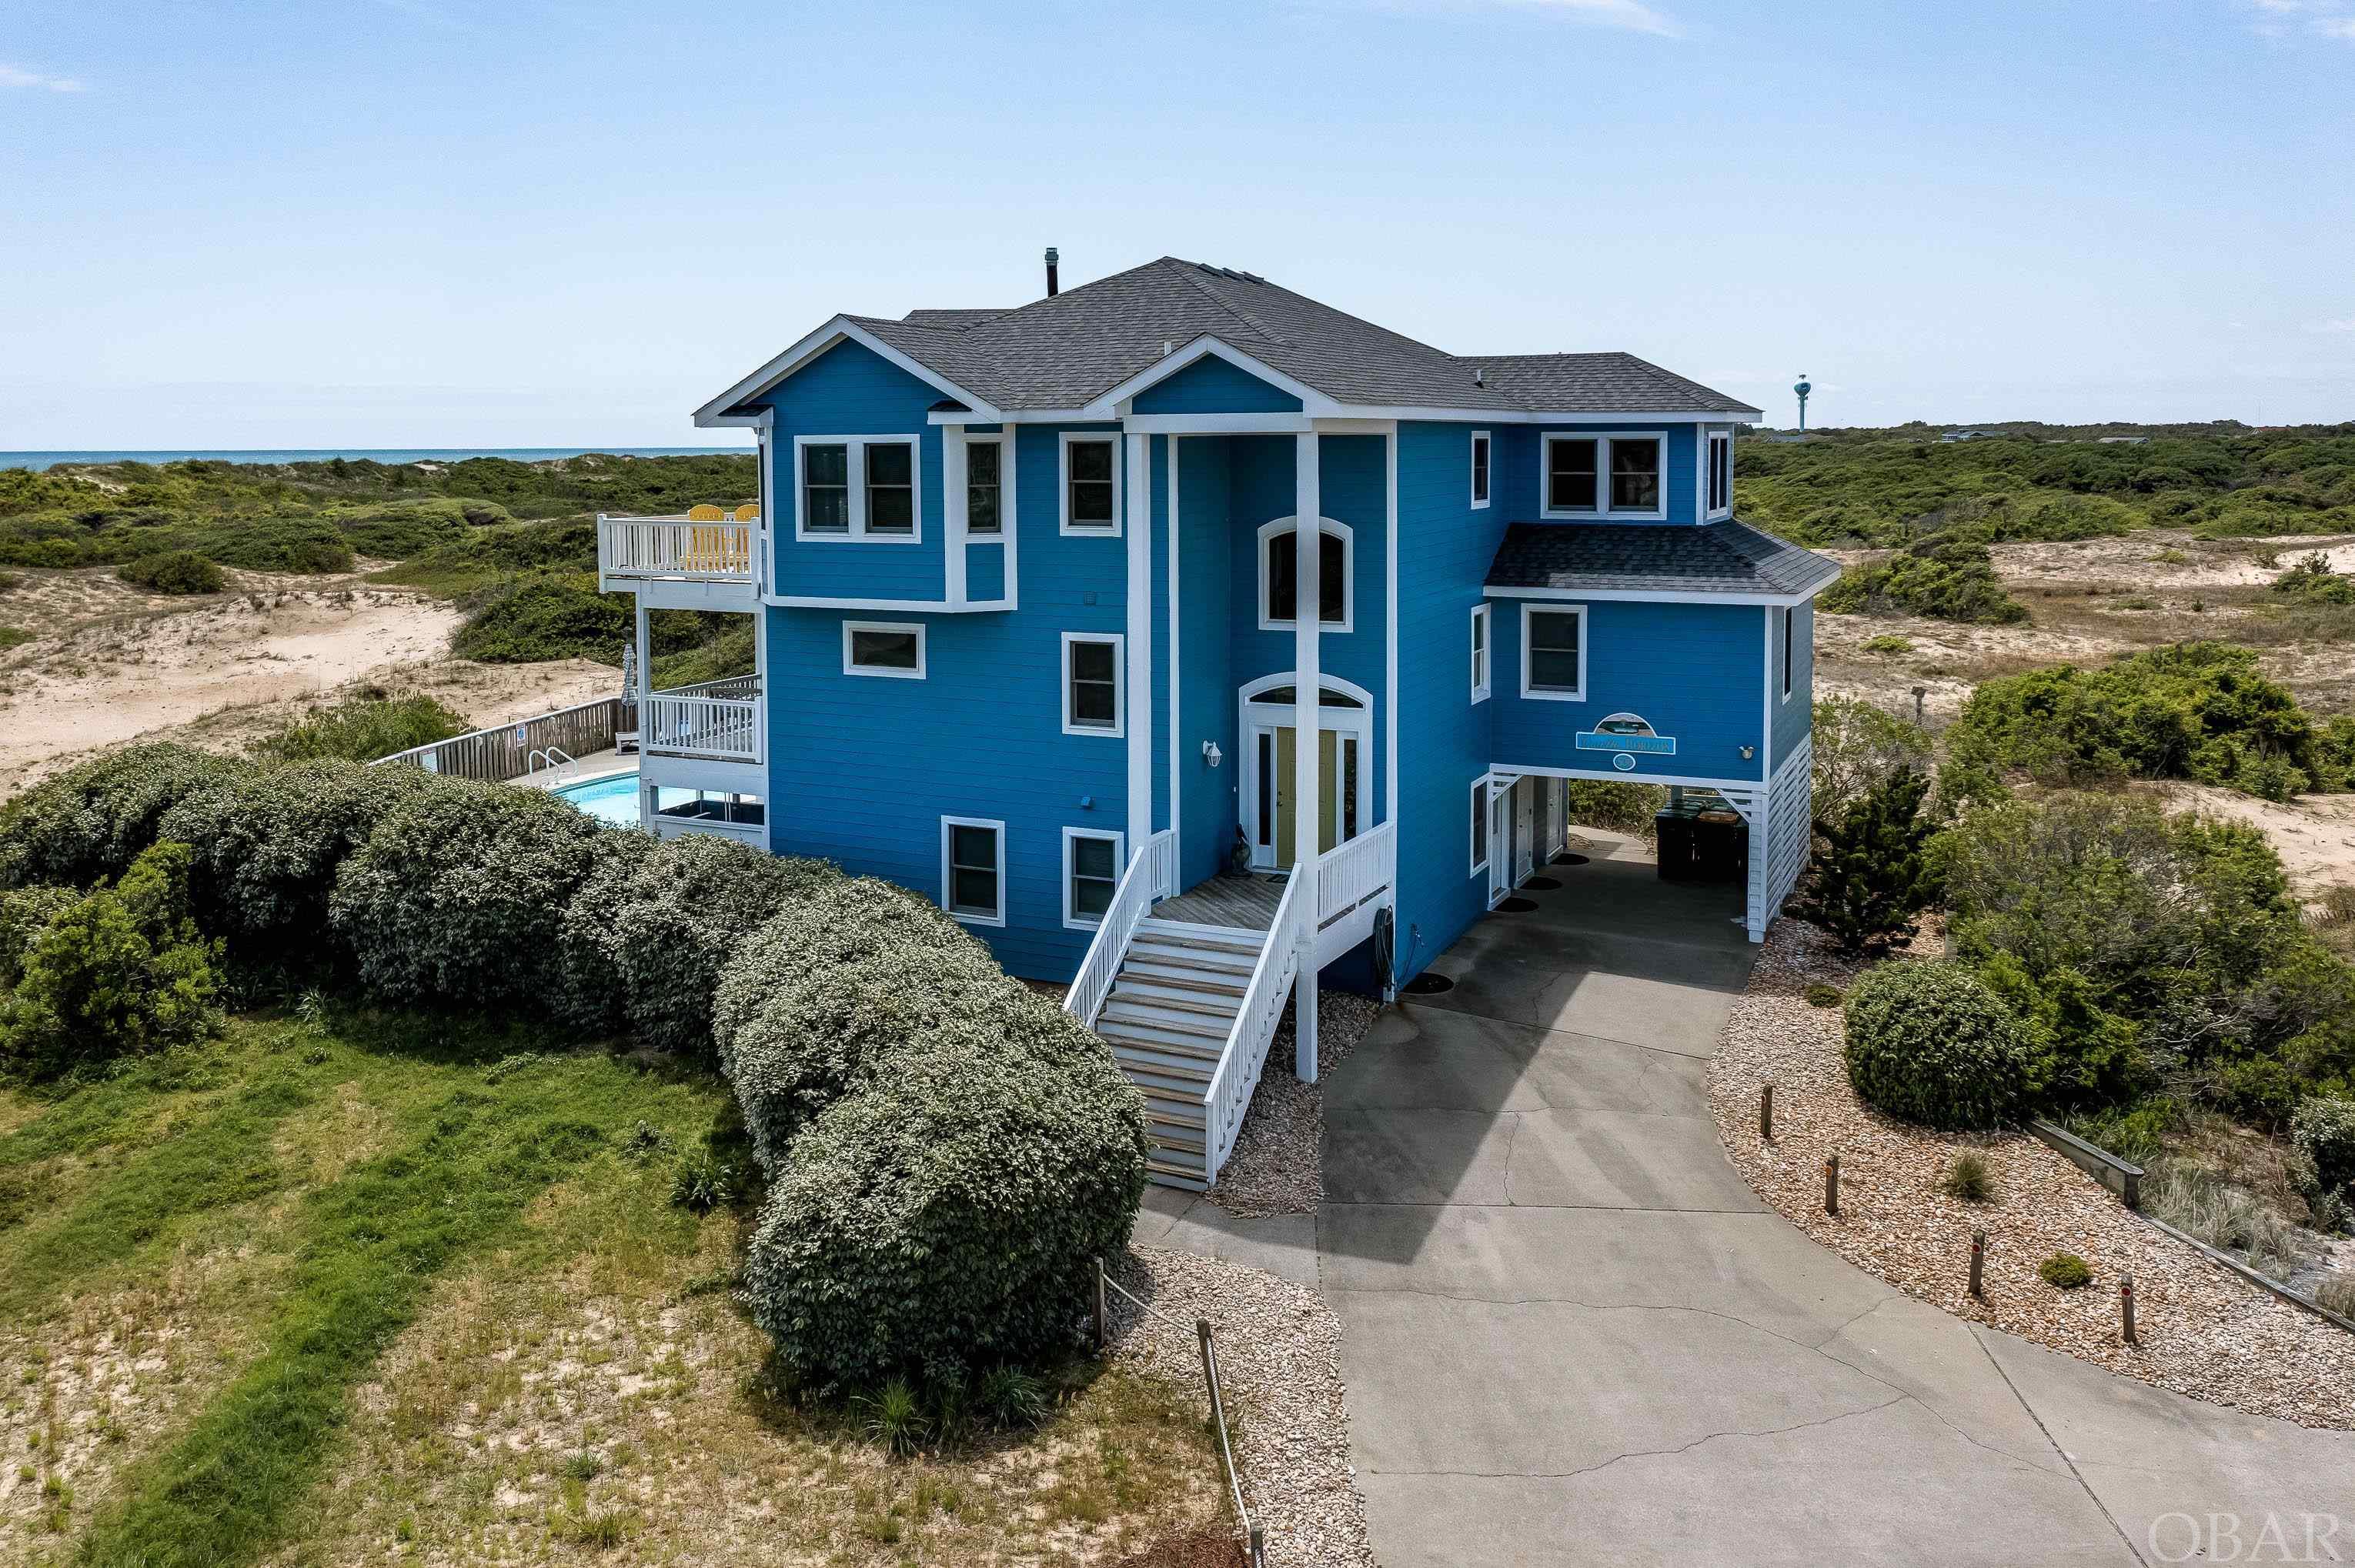 This home has better location, beach access and ocean views than most semi-oceanfront homes!.. Just 150’ to the private beach access! 1/2 acre elevated site in Section A of Ocean Sands South! Incredible, sweeping ocean views to the southeast! " Corolla Horizon " has a fabulous layout, almost 4000 sf heated, 7BR's 5 Full Baths and 2 half baths! Huge game room with small kitchenette, Billiard Table plus sitting area, opens to a large pool w/ lots of room to spread out! All bedrooms are spacious, 3 are master suites and 3 of the 4 other BR's have adjoining baths! Laundry room on mid level! Large great room with a big kitchen, dual dishwashers, huge island bar plus adjoining dining area (could double as home office)... great for card games and also doubles as a sunroom! Great room is adjacent to large open oceanside decks and a southern exposed screened porch! Quality wood accents, gas log fireplace with built-in entertainment center! Whole house charcoal filtration system and a hot water recirculation system.  New exterior paint! Quiet Cul-de- sac location, direct ocean access, 6 owner closets, no through traffic here! Recent Improvements: All new Tv’s in the last year, two new heat pumps (one in 2021 the other in 2022), 25 of the windows were upgraded last year, new concrete coping and tile in the swimming pool 2018, New vinyl railing on decks (2016 & 2019) and Roof replaced 2016.